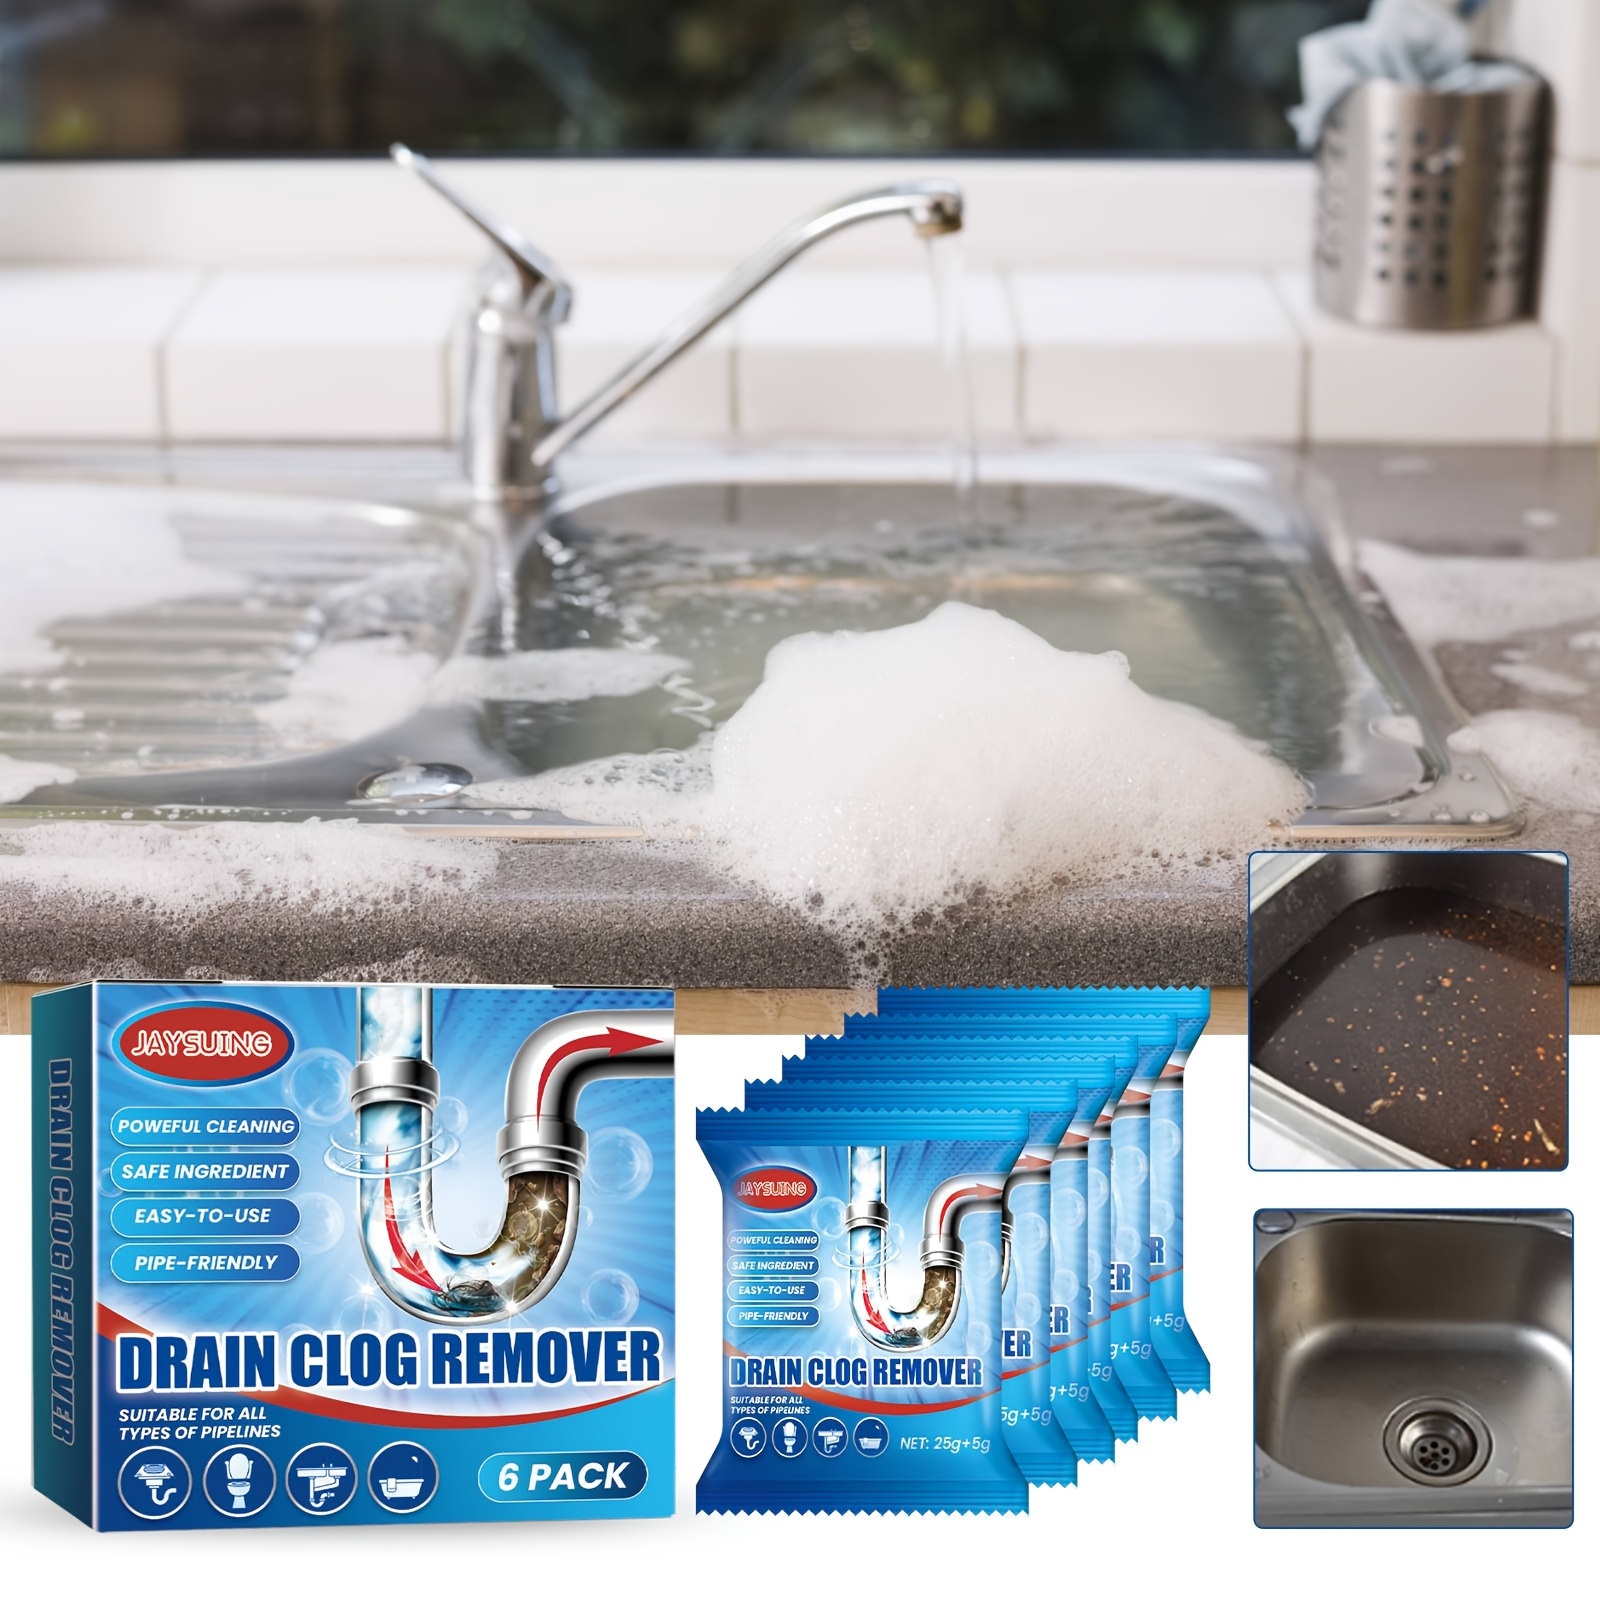 SUPER CLOG REMOVER DRAIN PIPE BASIN CLEANER CLOGGED DRAINAGE REMOVER POWDER  CLEANING FOR TOILET AND KITCHEN